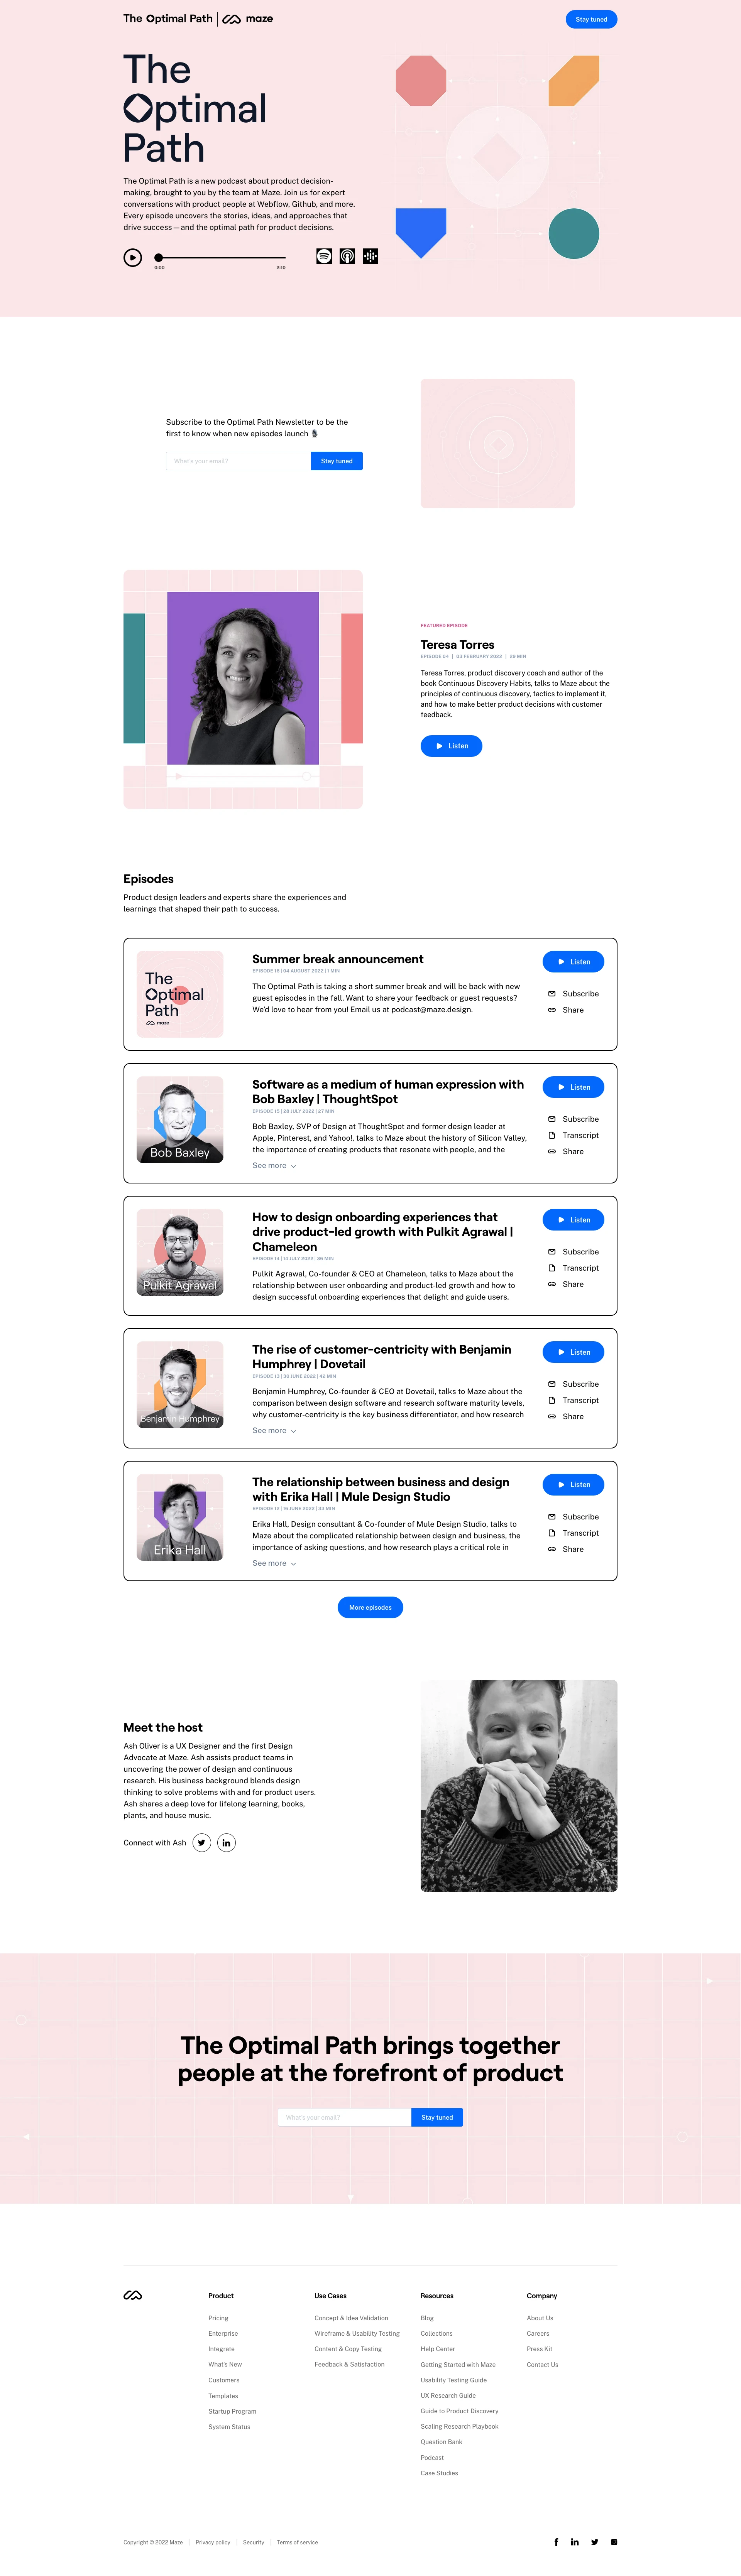 The Optimal Path Podcast Landing Page Example: The Optimal Path is a new podcast about product decision-making brought to you by the team at Maze. Join us for expert conversations with product people at Webflow, Github, and more. 